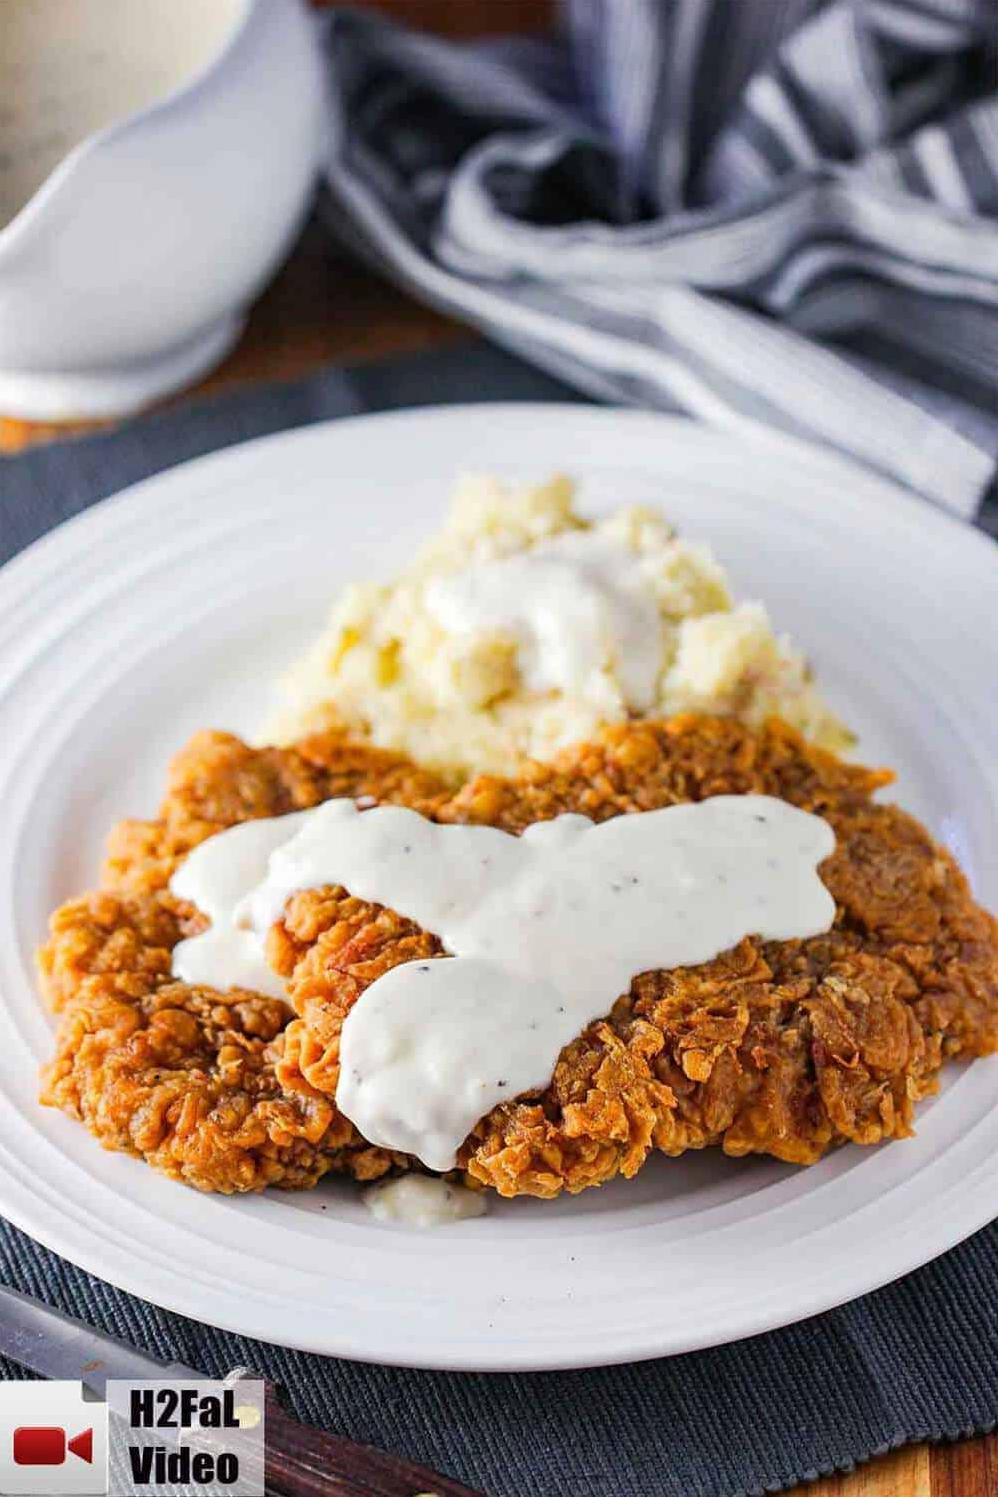  If you're a fan of crispy chicken or schnitzels, you're going to love these